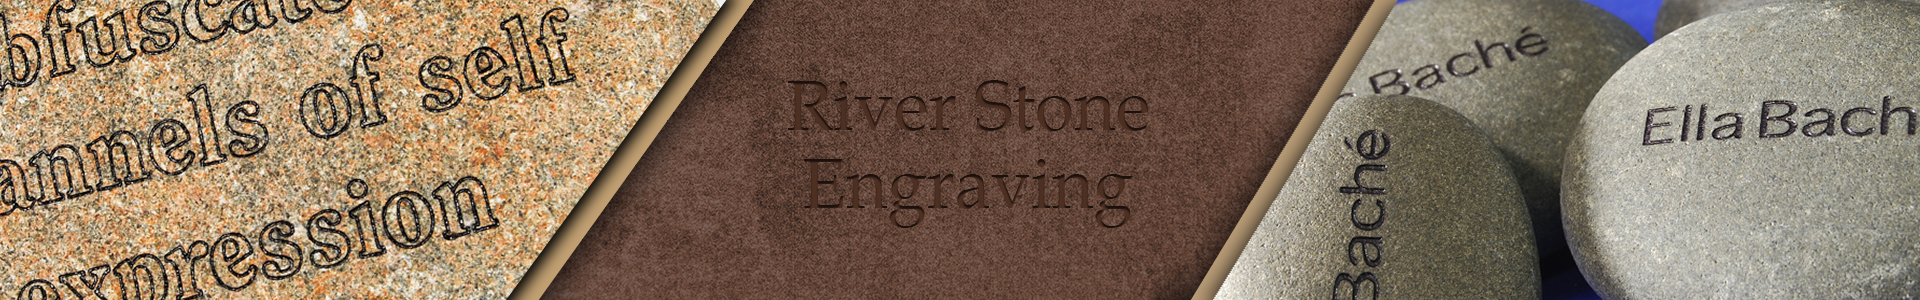 river-stone-updated.png